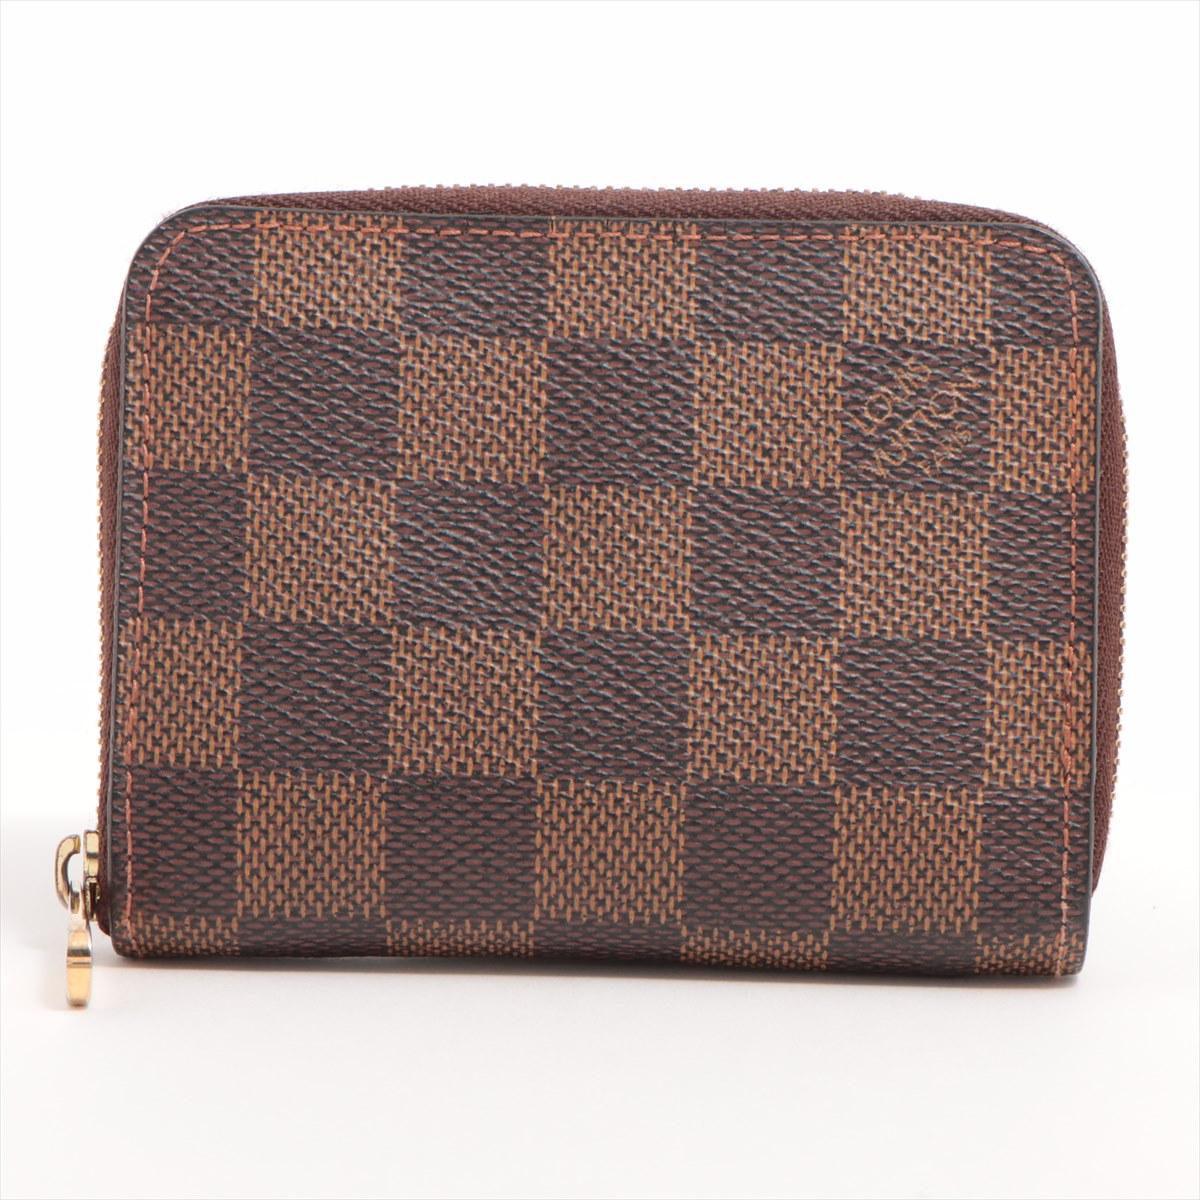 The Louis Vuitton Damier Ebene Zippy Coin Purse embodies the essence of sophistication and practicality. The Damier canvas exterior in shades of dark brown and light brown immediately catches the eye. The iconic checkered pattern, a hallmark of